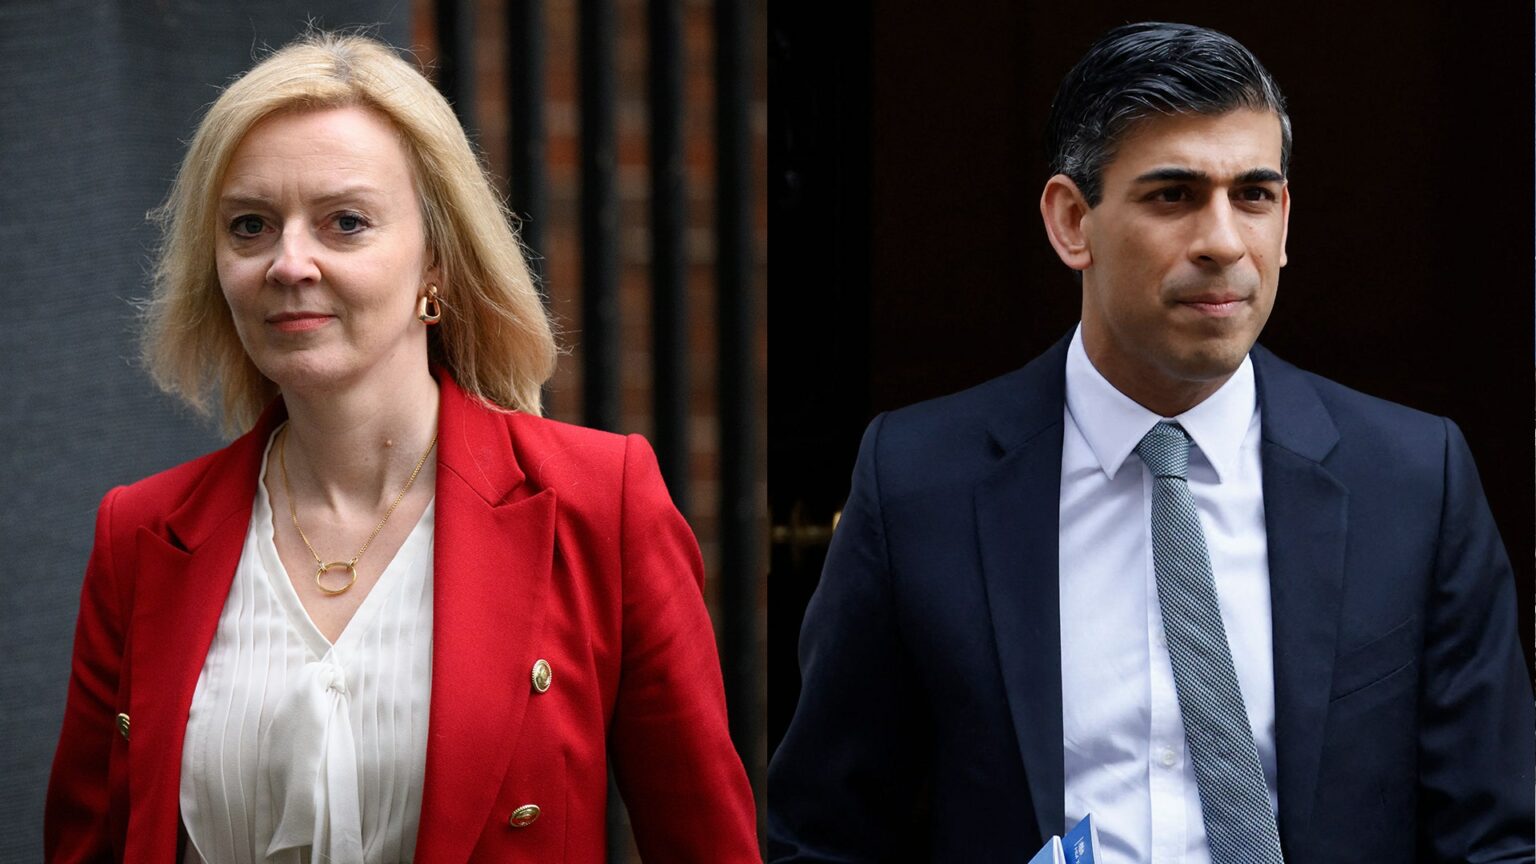 Who is Liz Truss ? The Prime ministerial candidate, opposite Rishi Sunak